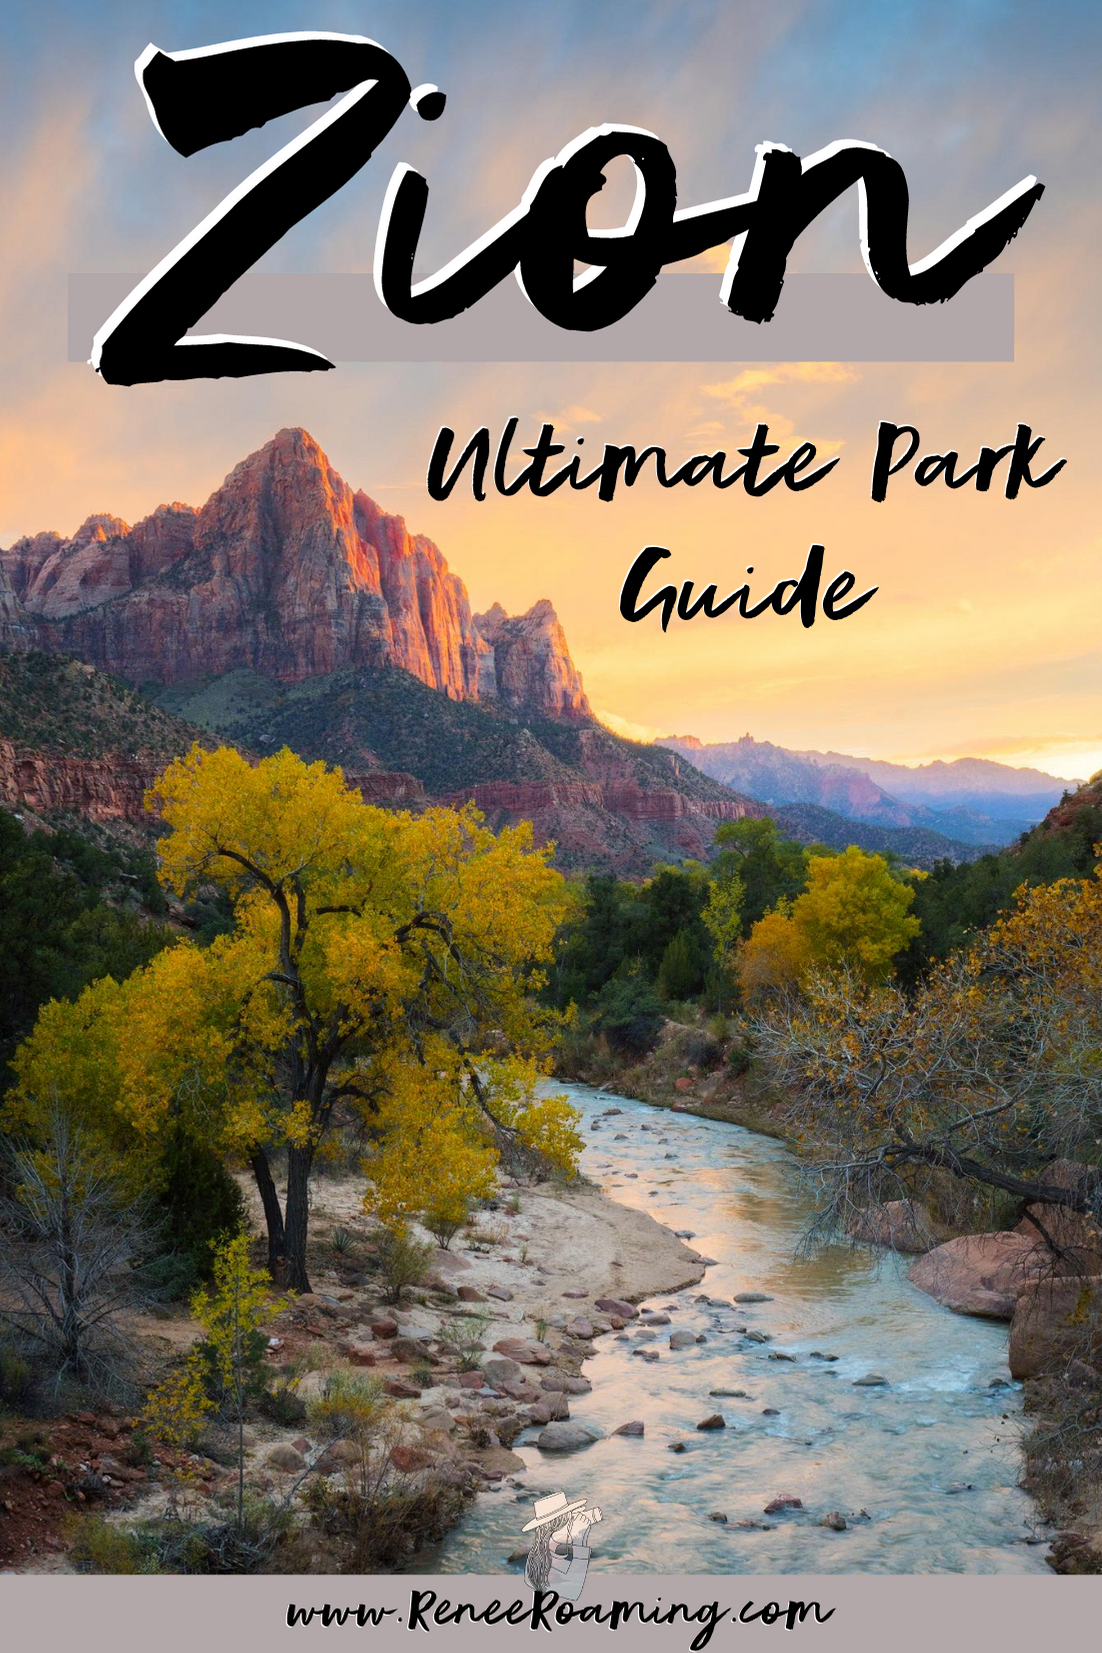 The Ultimate Guide to Exploring Zion National Park